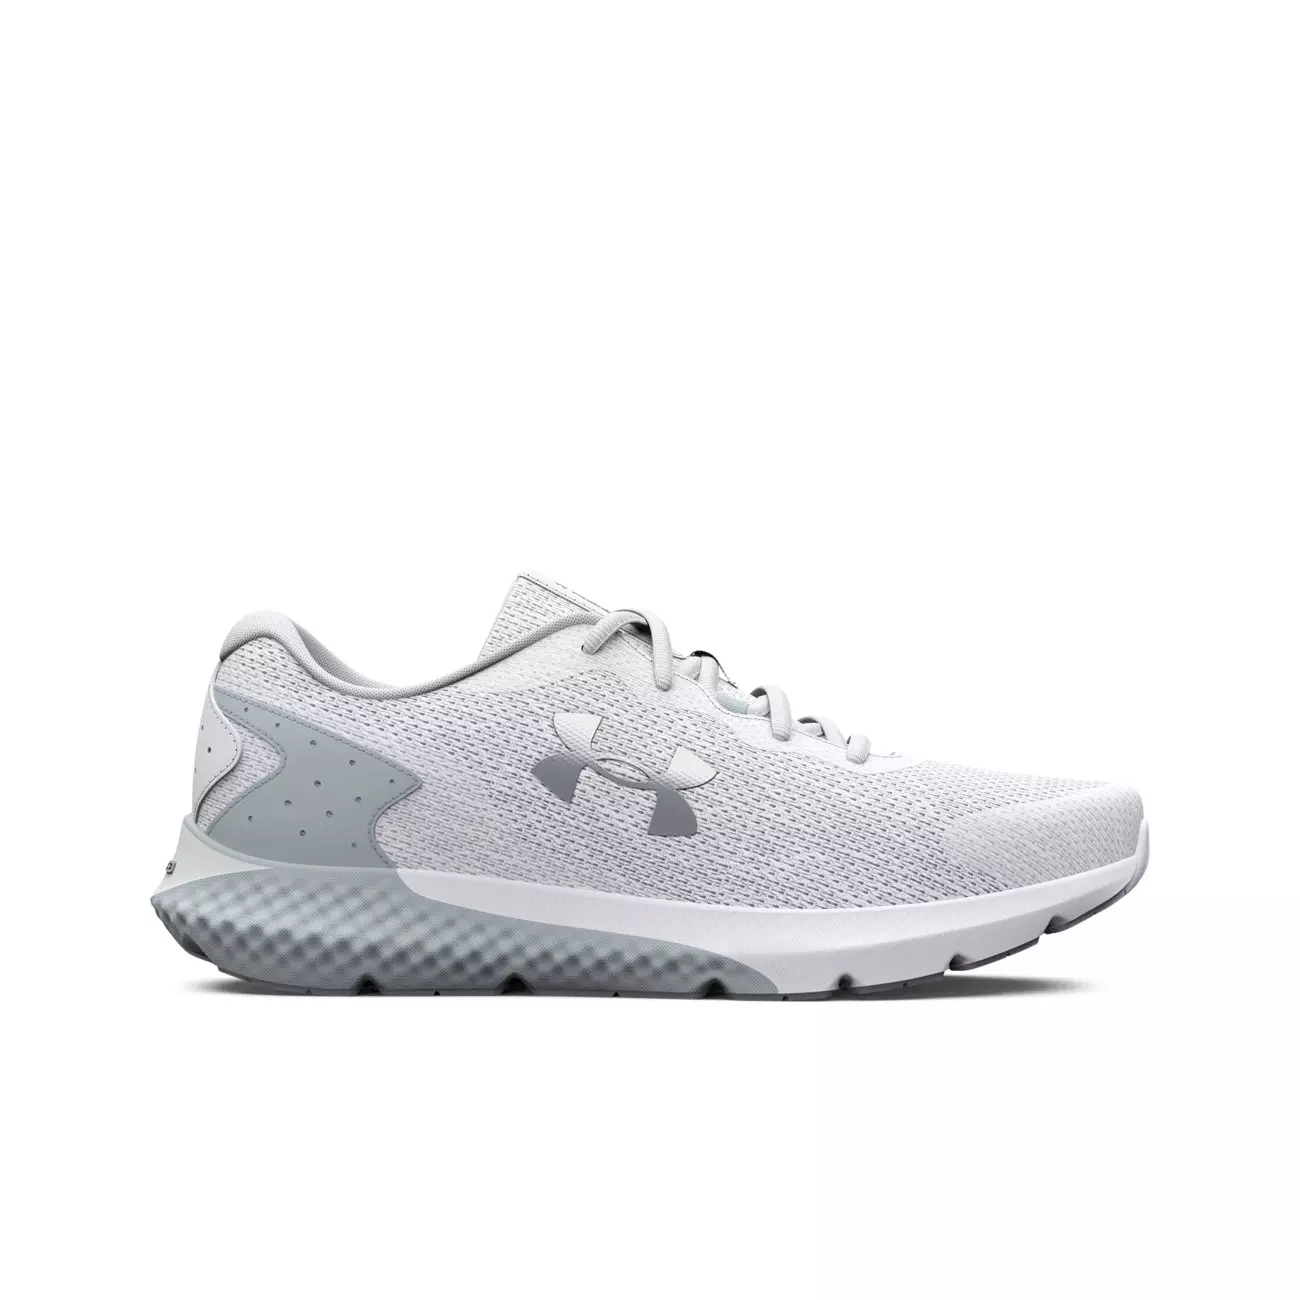 Under Armour Charged Rogue 3 Knit Womens Running Shoes